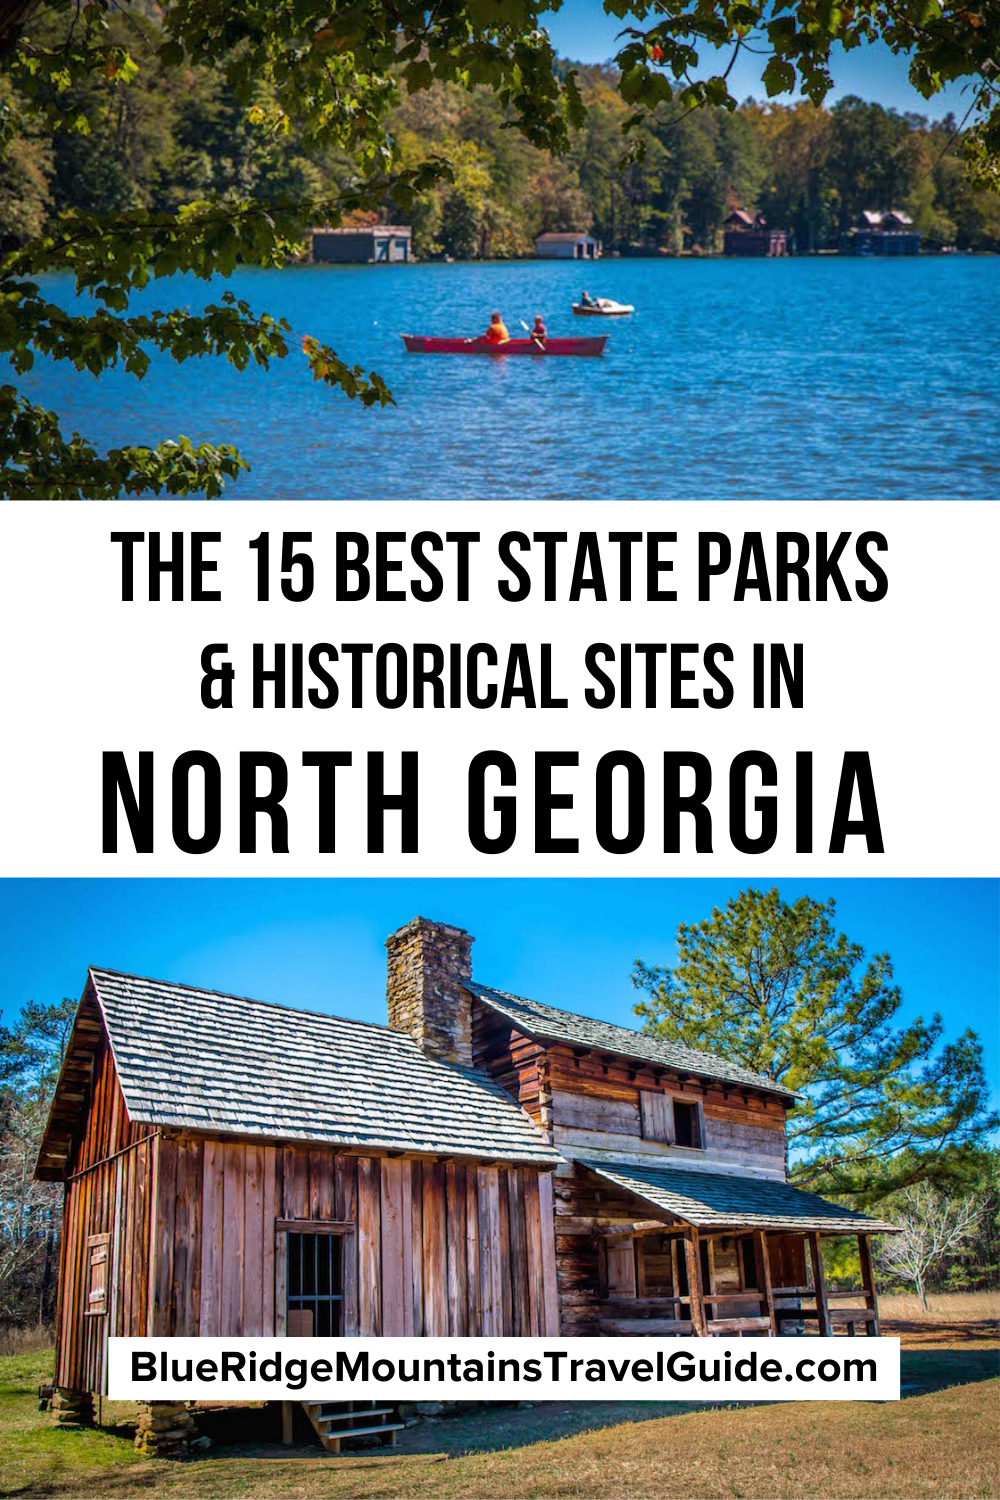 15 Best Things To Do In Blairsville, GA